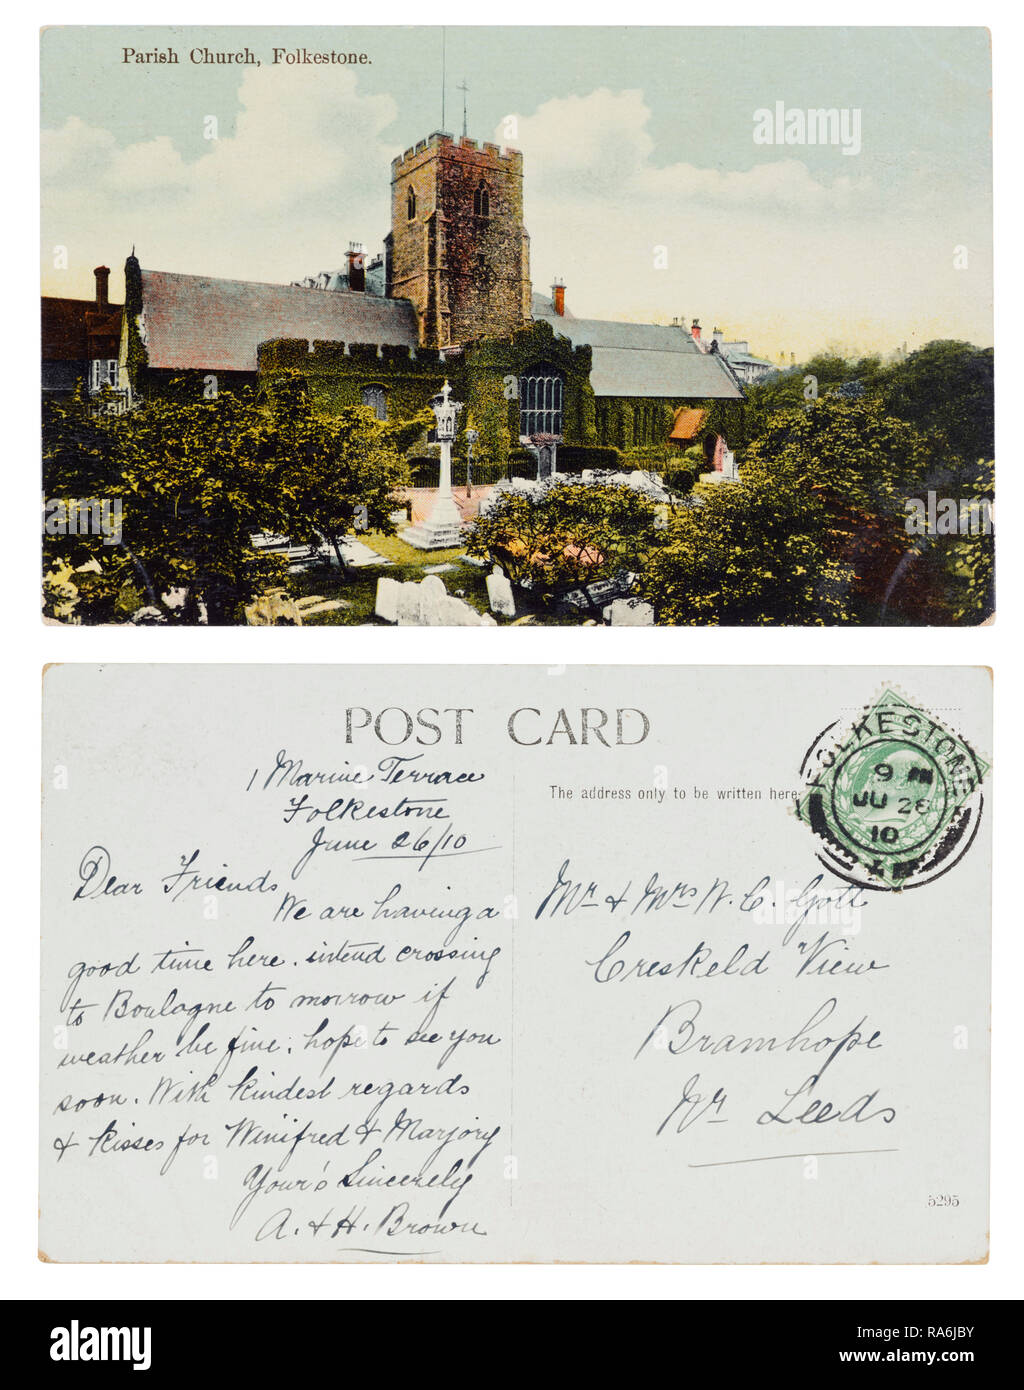 Postcard sent from A & H Brown staying at 1 Marine Terrace, Folkestone in June 1910 to Mr & Mrs Gott, Creskeld View, Bramhope near Leeds Stock Photo